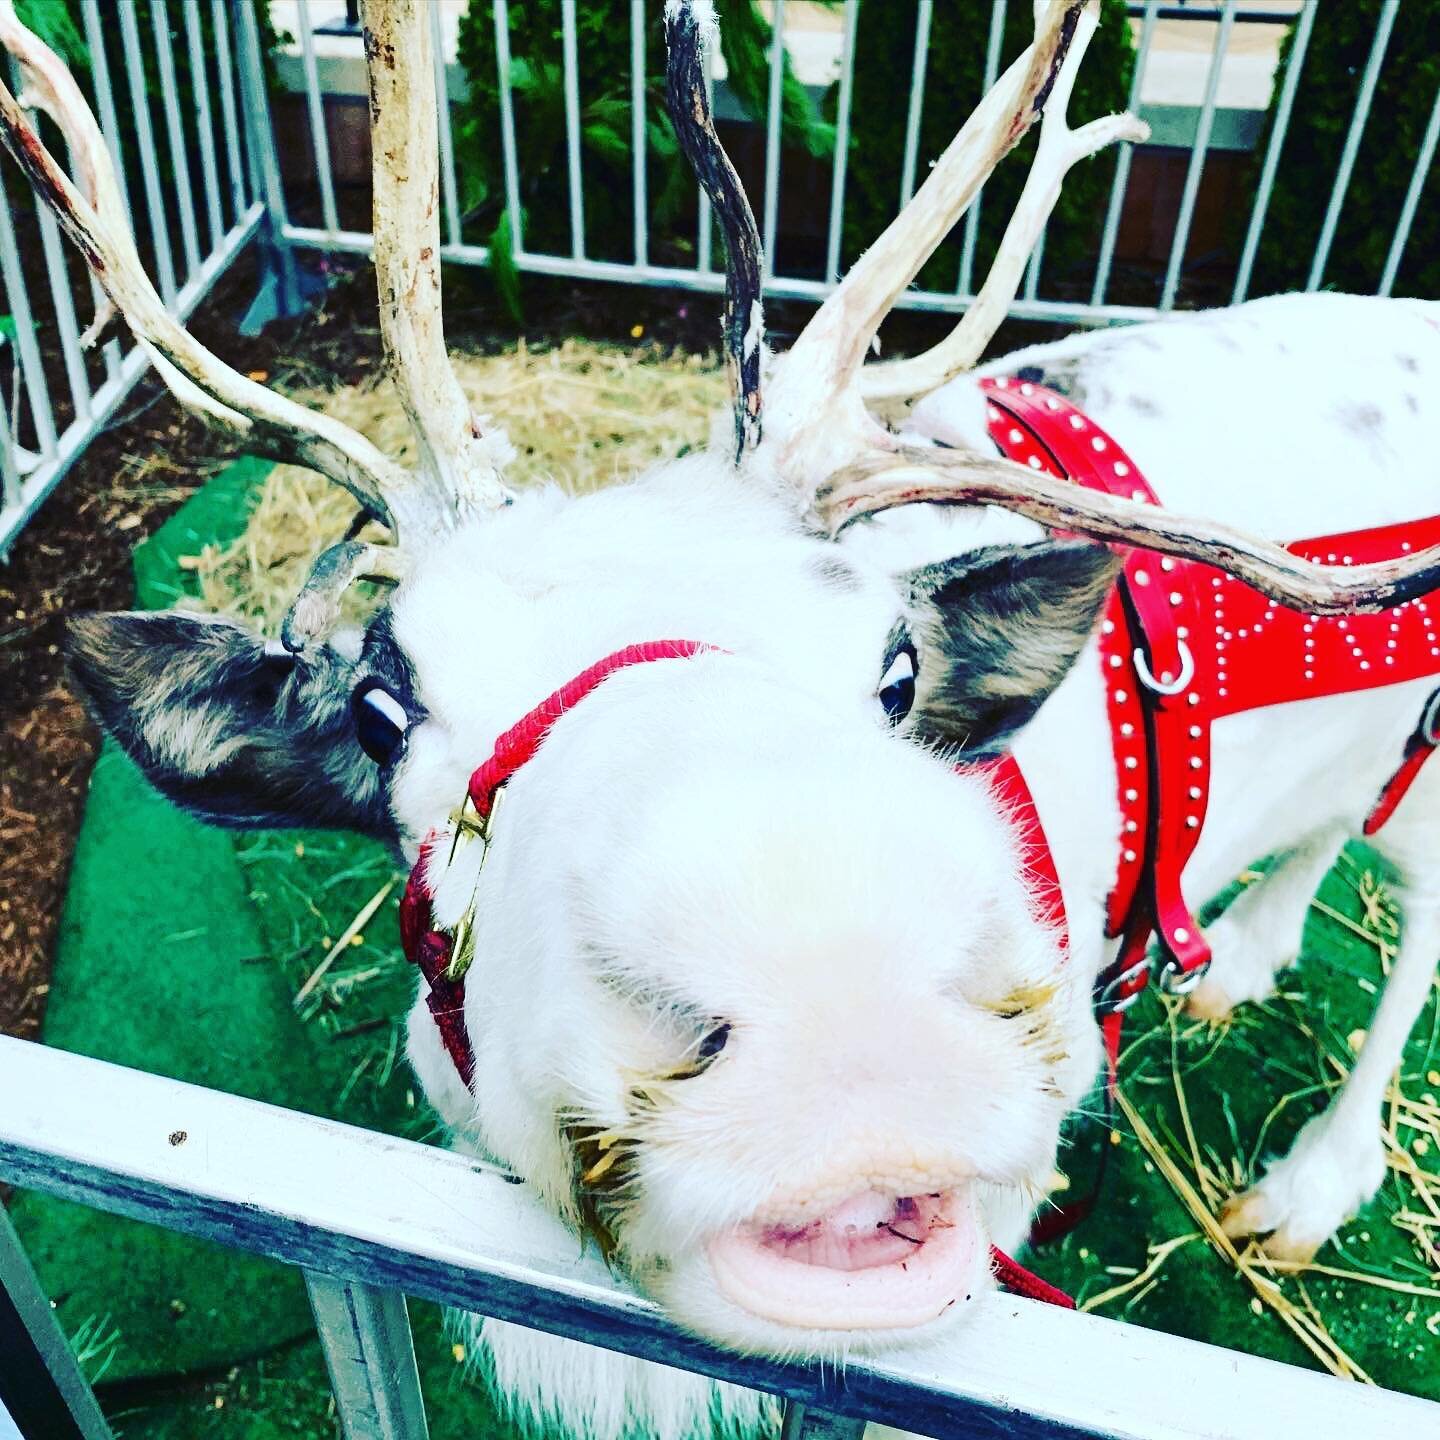 Guys! Guess what!?! Prancer made a visit to the @ritzcarltonstlouis this weekend! 

What&rsquo;s been your favorite holiday surprise this year?